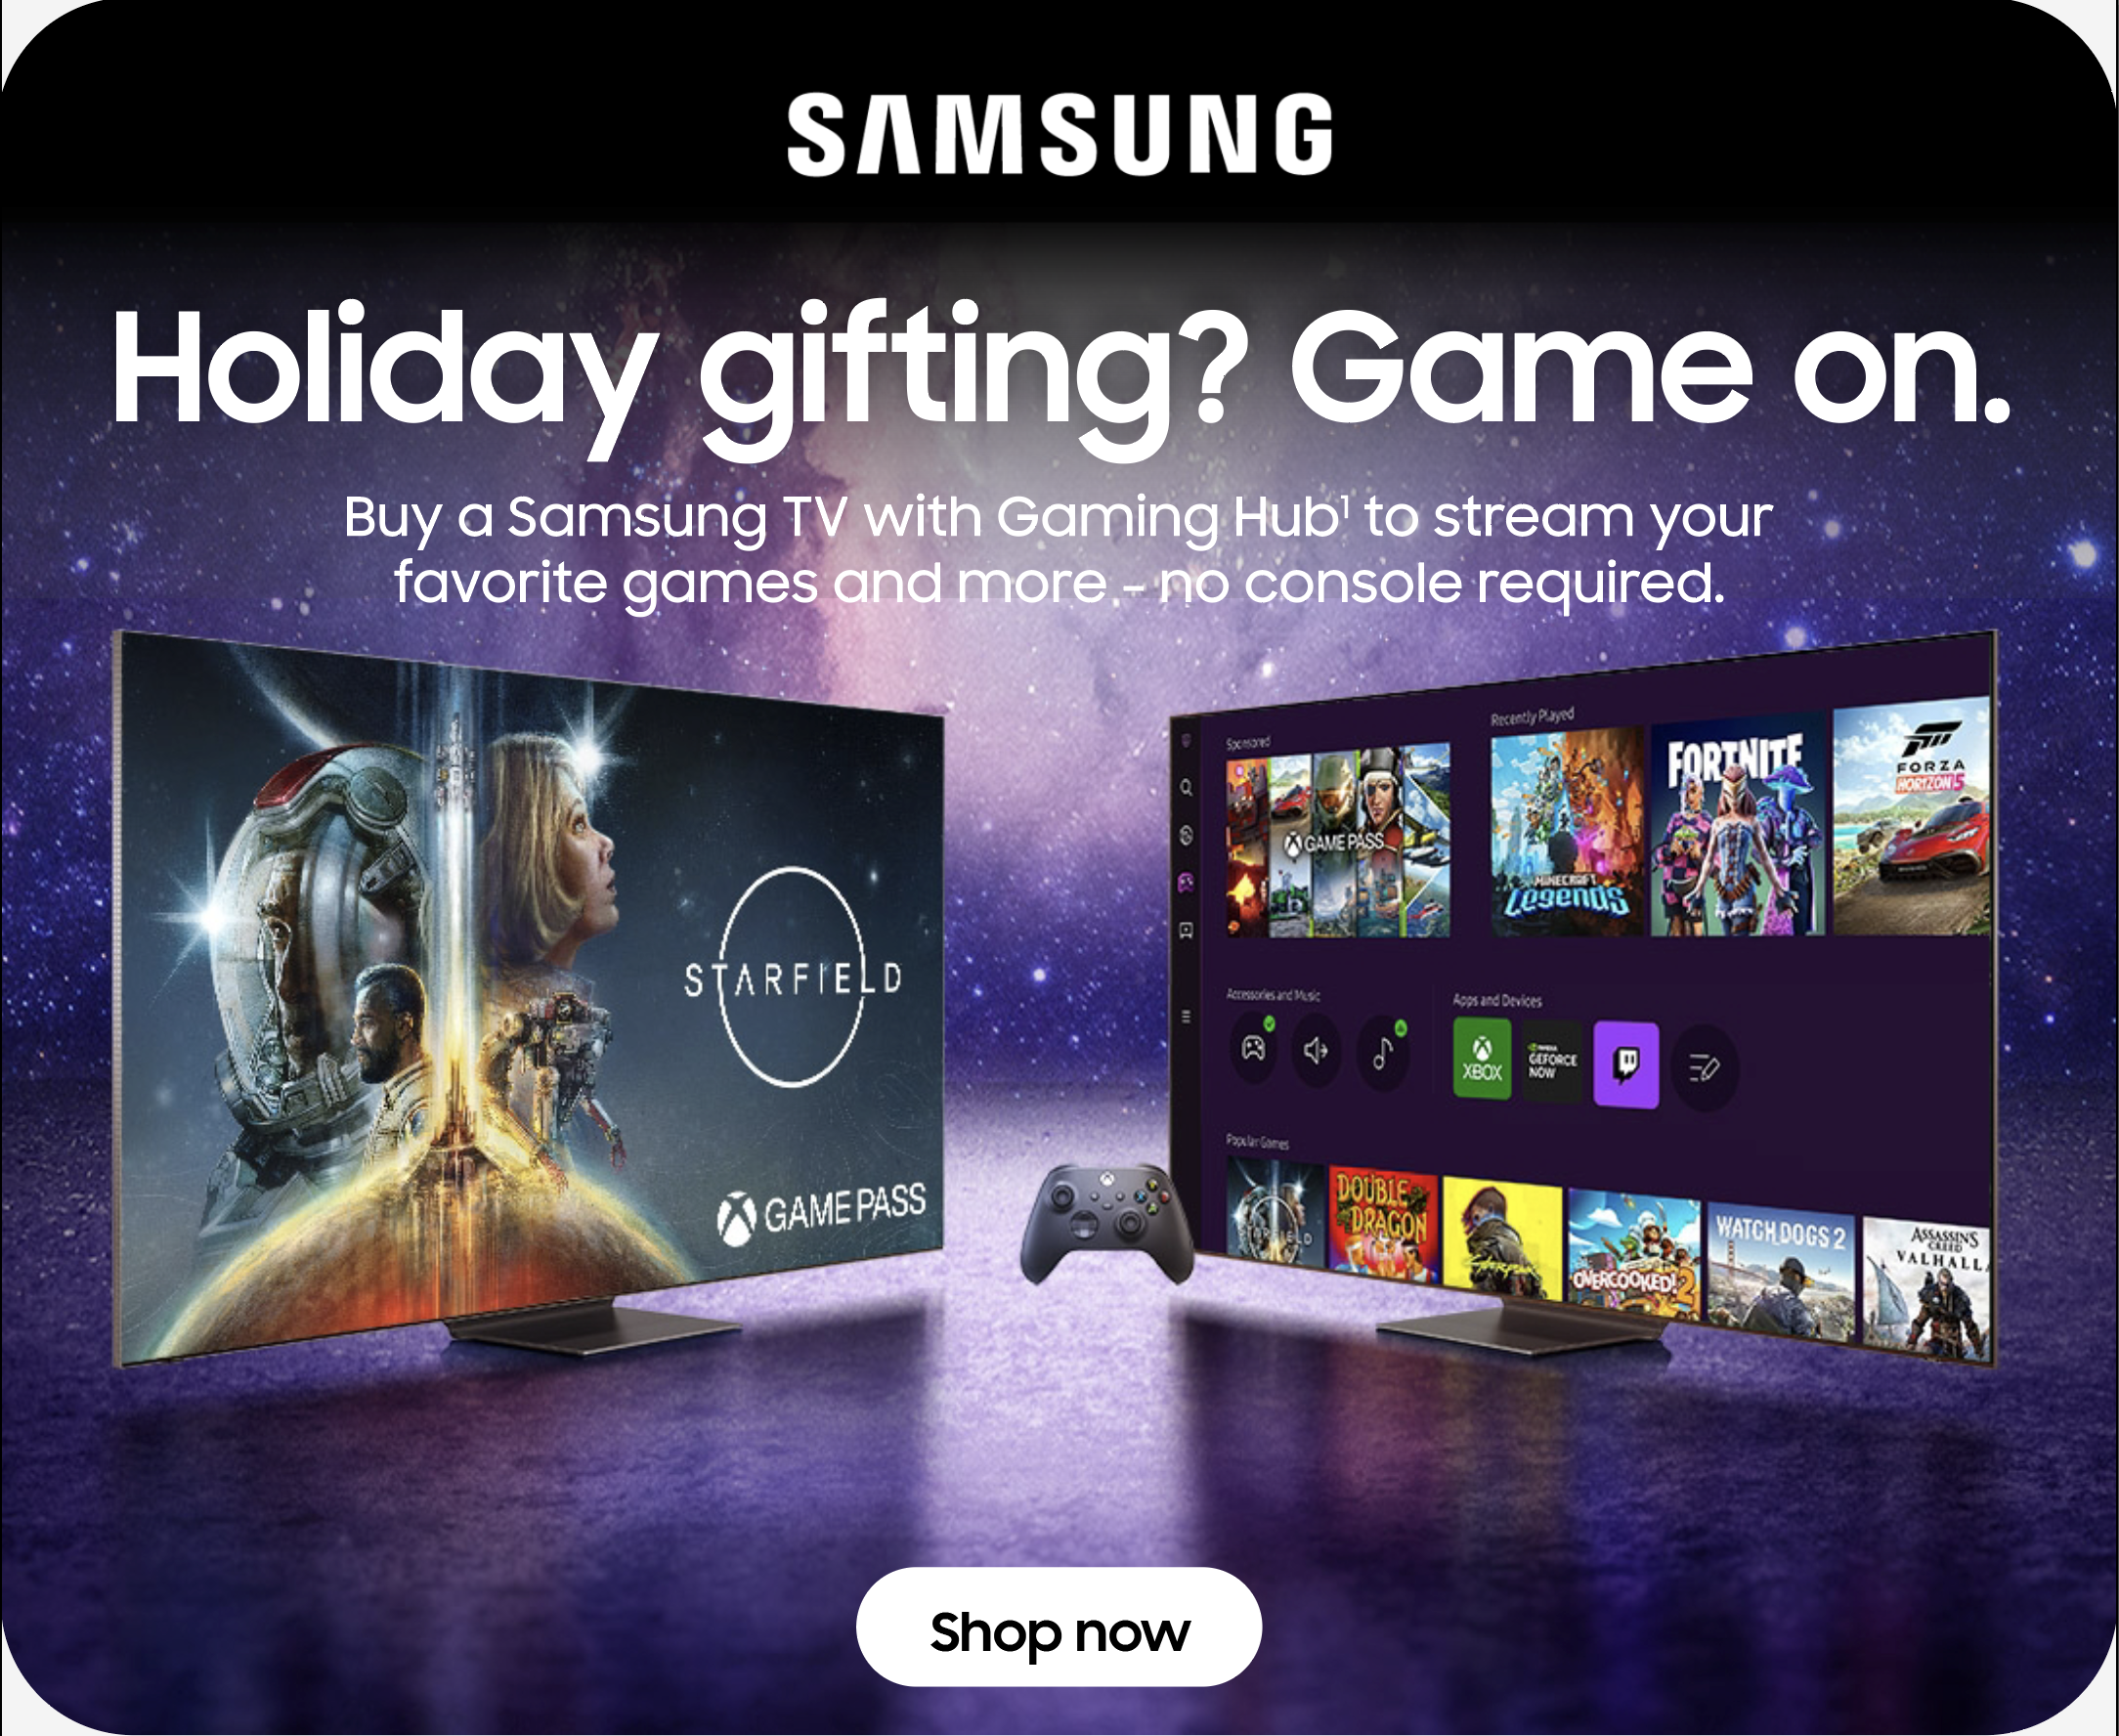 Holiday gifting? Game on. Buy a samsung tv with gaming hub to stream your favorite games and more, no console required.